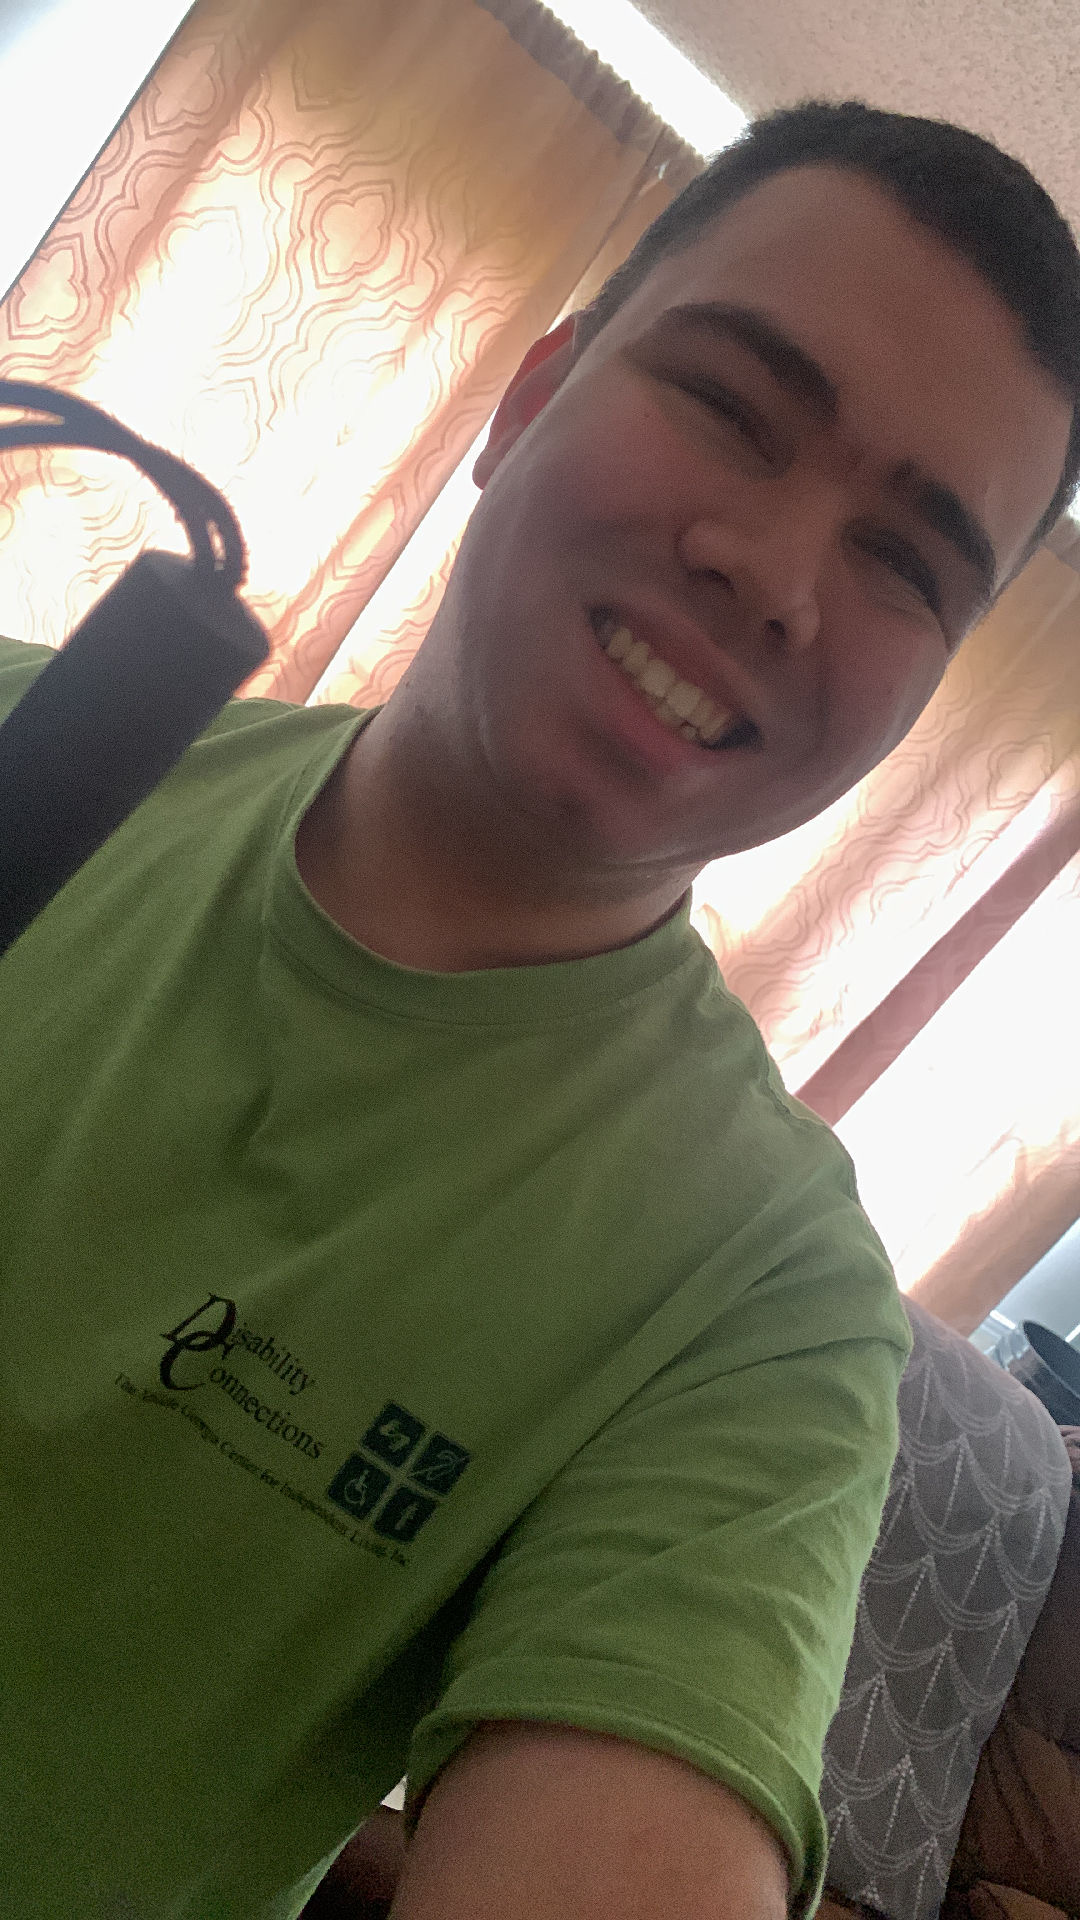 Armando, a young man in the picture, is holding a cane in his right hand, which is partially visible in the foreground. He has a broad smile, short dark hair, and is wearing a lime green t-shirt with a logo on the left side that reads "Disability Connections" with a tagline "The Resource for People with Disabilities" and a graphic of four interlocking squares. In the background, there is a curtain with a floral pattern and a glimpse of a room with a couch. The atmosphere of the picture is warm and cozy, and the man appears to be in a good mood. Copyright 2023 by Armando Vias.